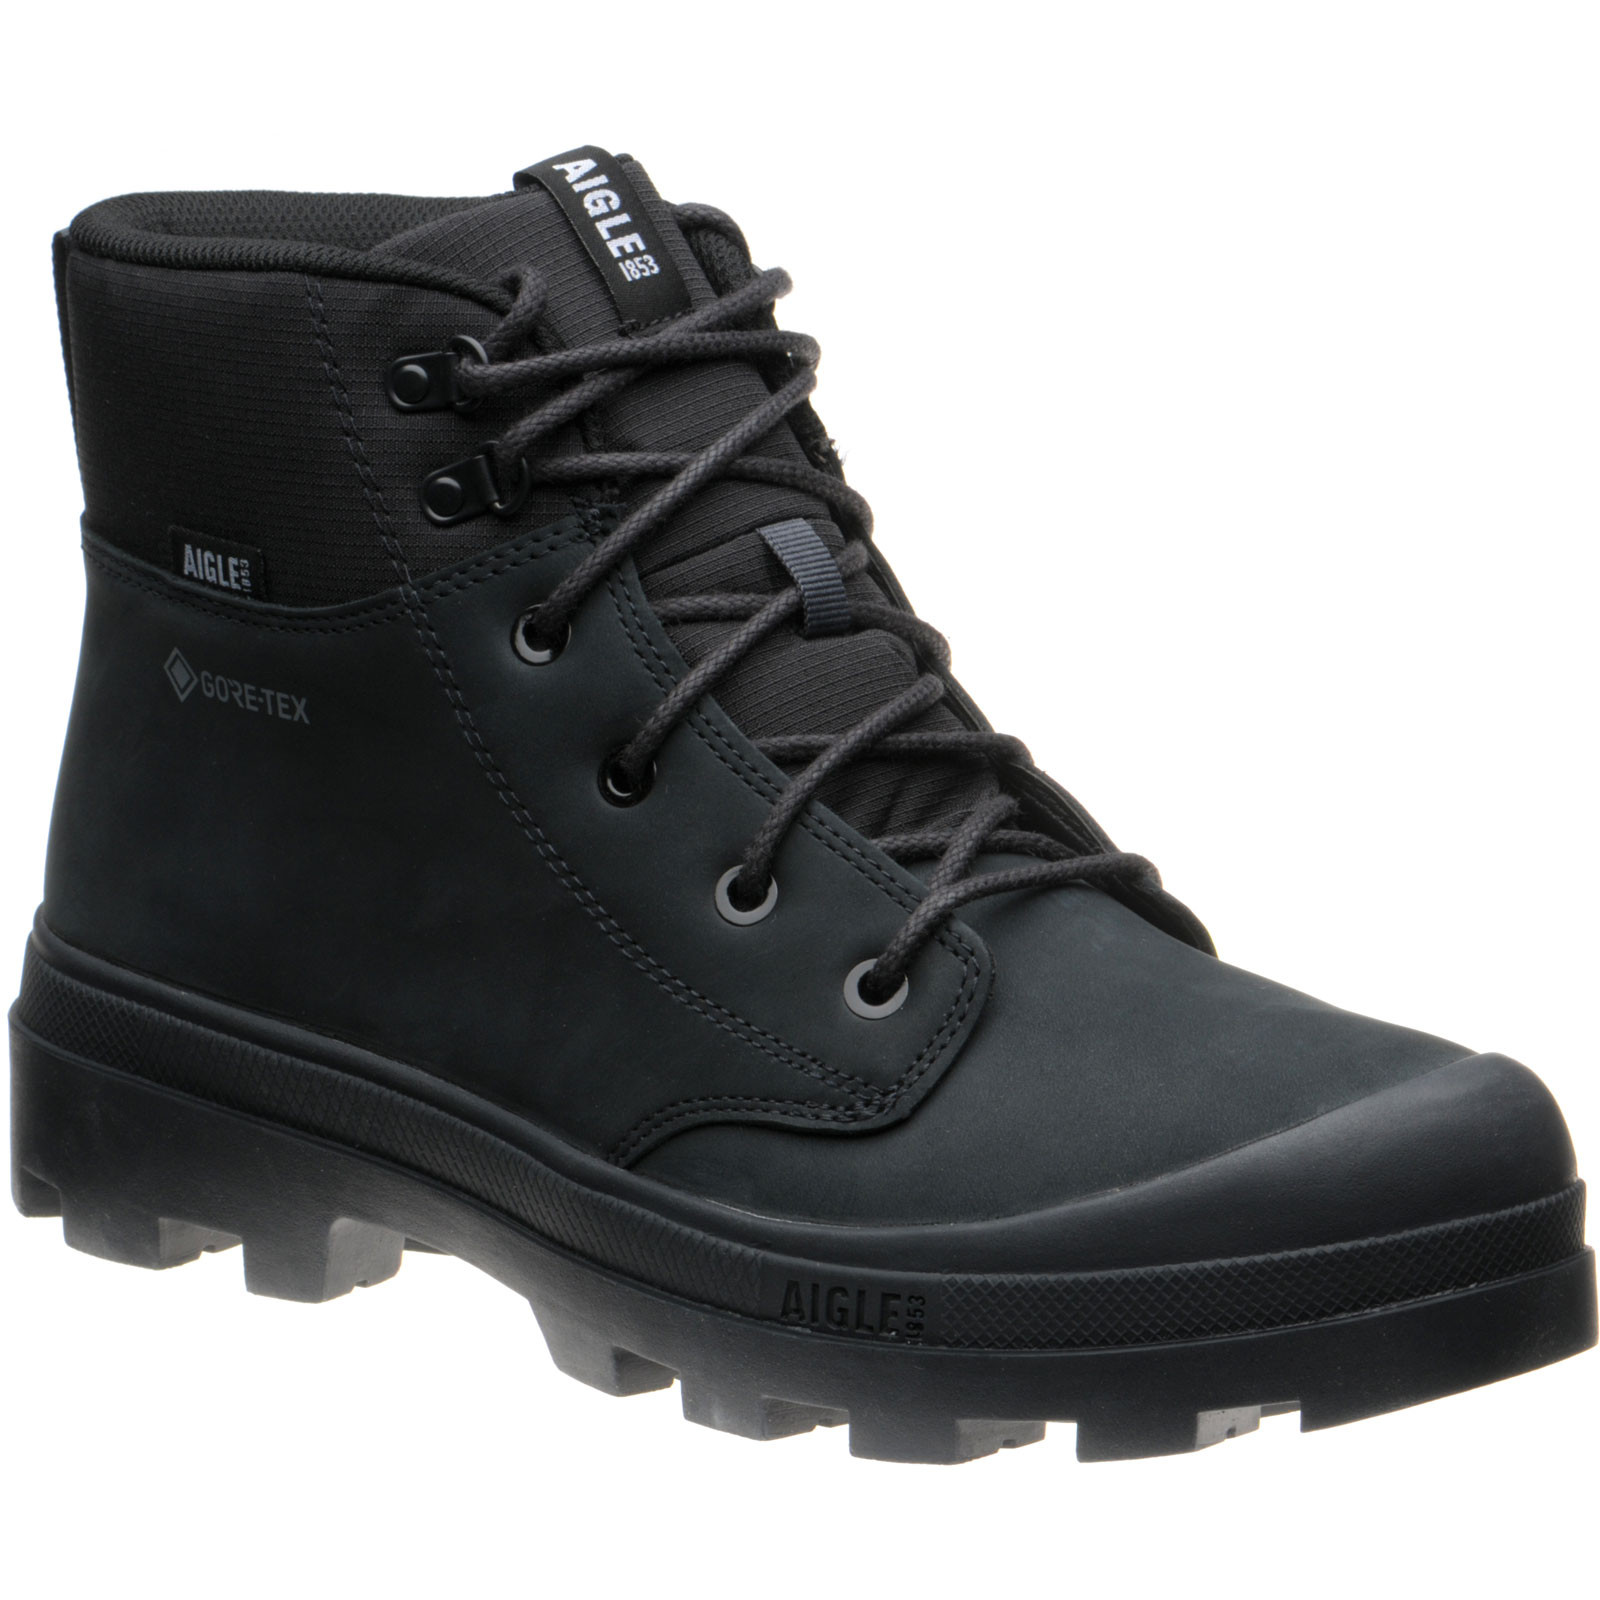 Aigle shoes | Aigle Boots | Tenere LTR GTX rubber-soled boots in Black ...